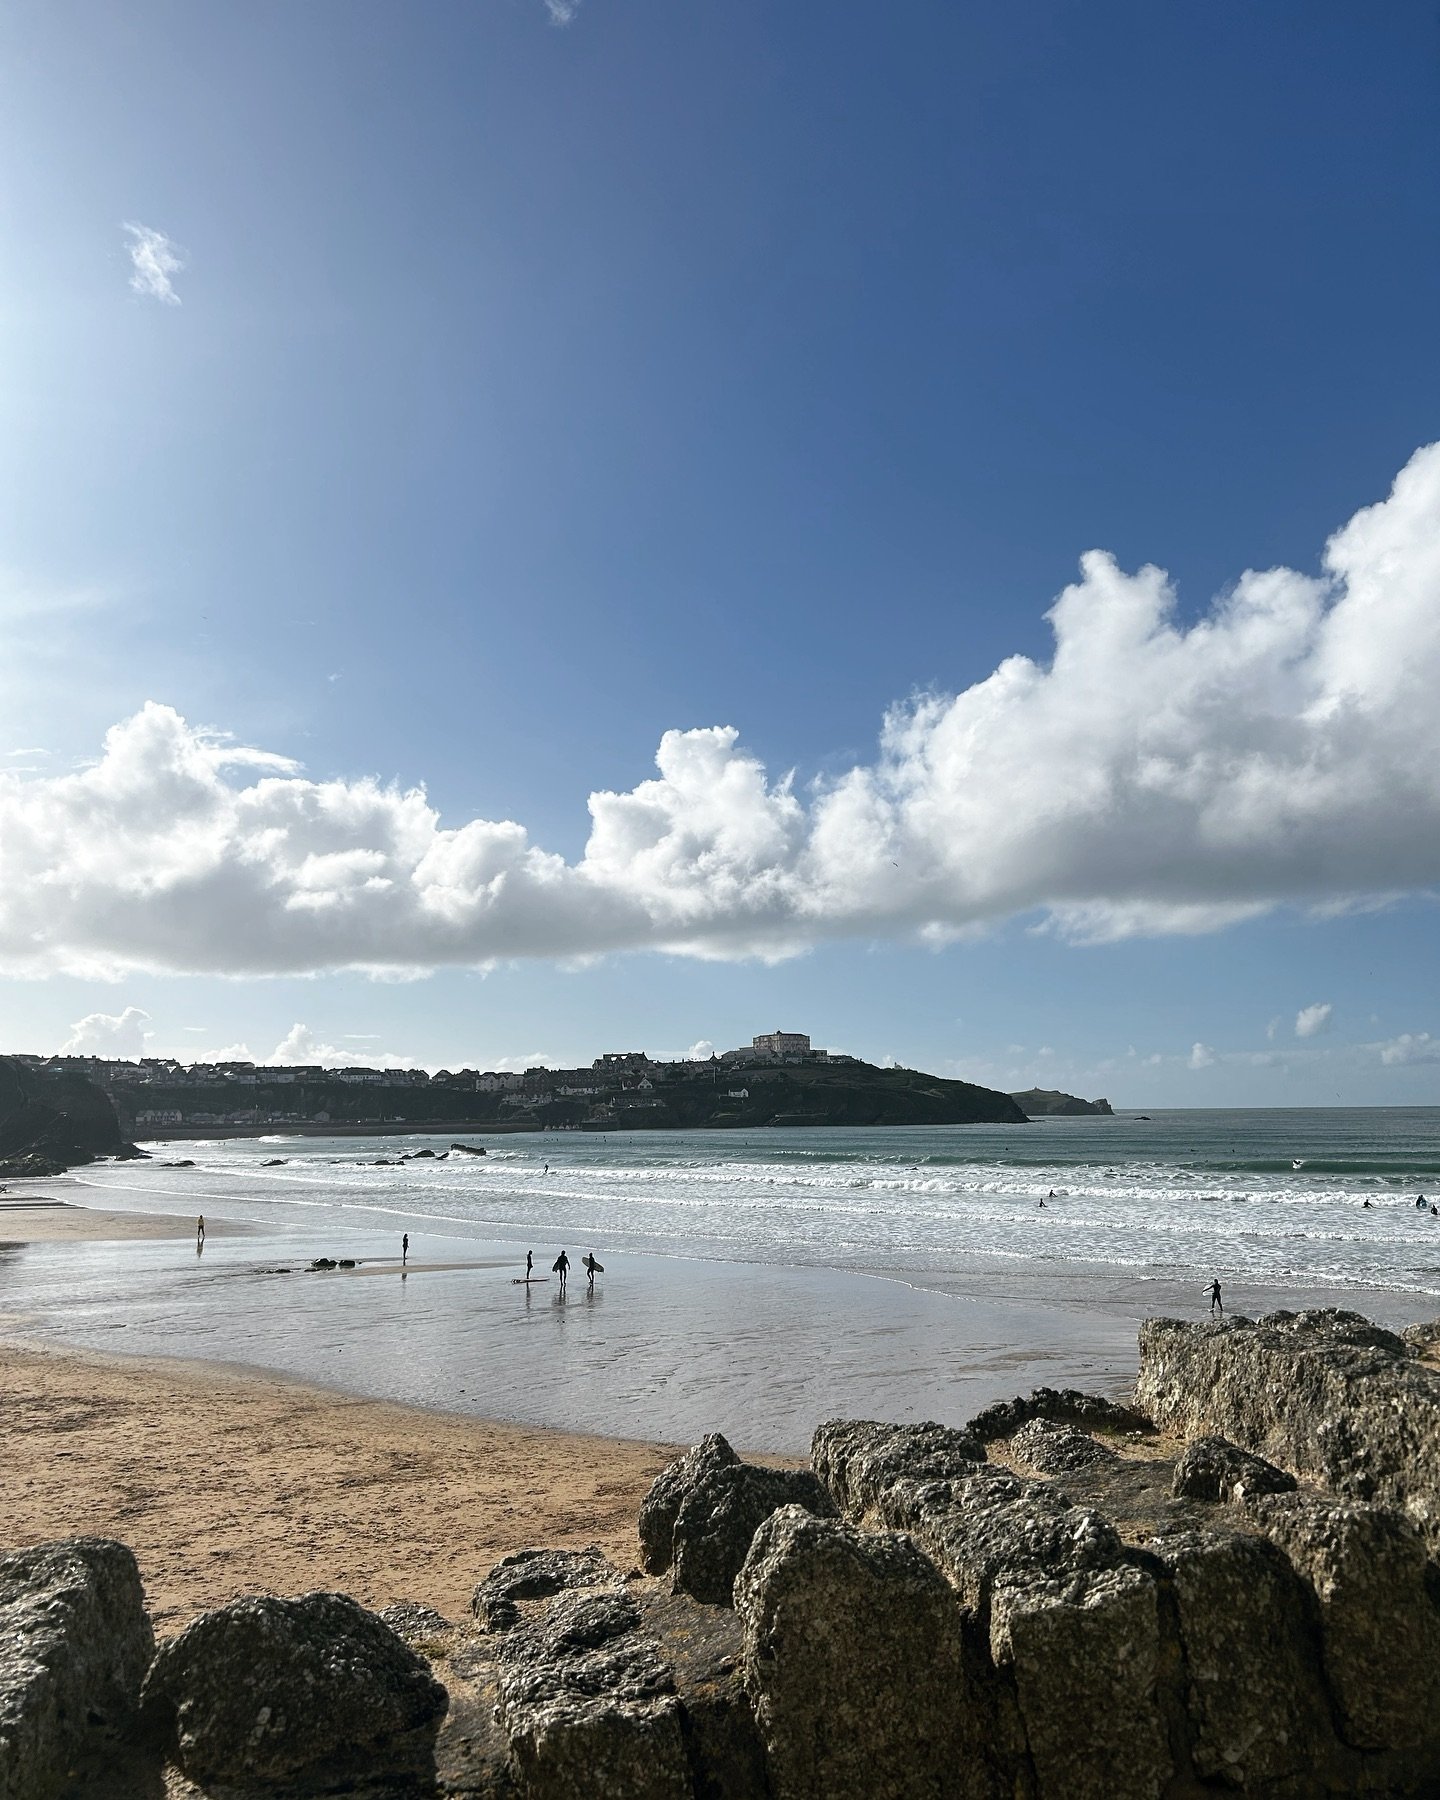 A Sunny Friday in Newquay 💙 

Where did today&rsquo;s adventure take you?

#thisisnaturallylearning